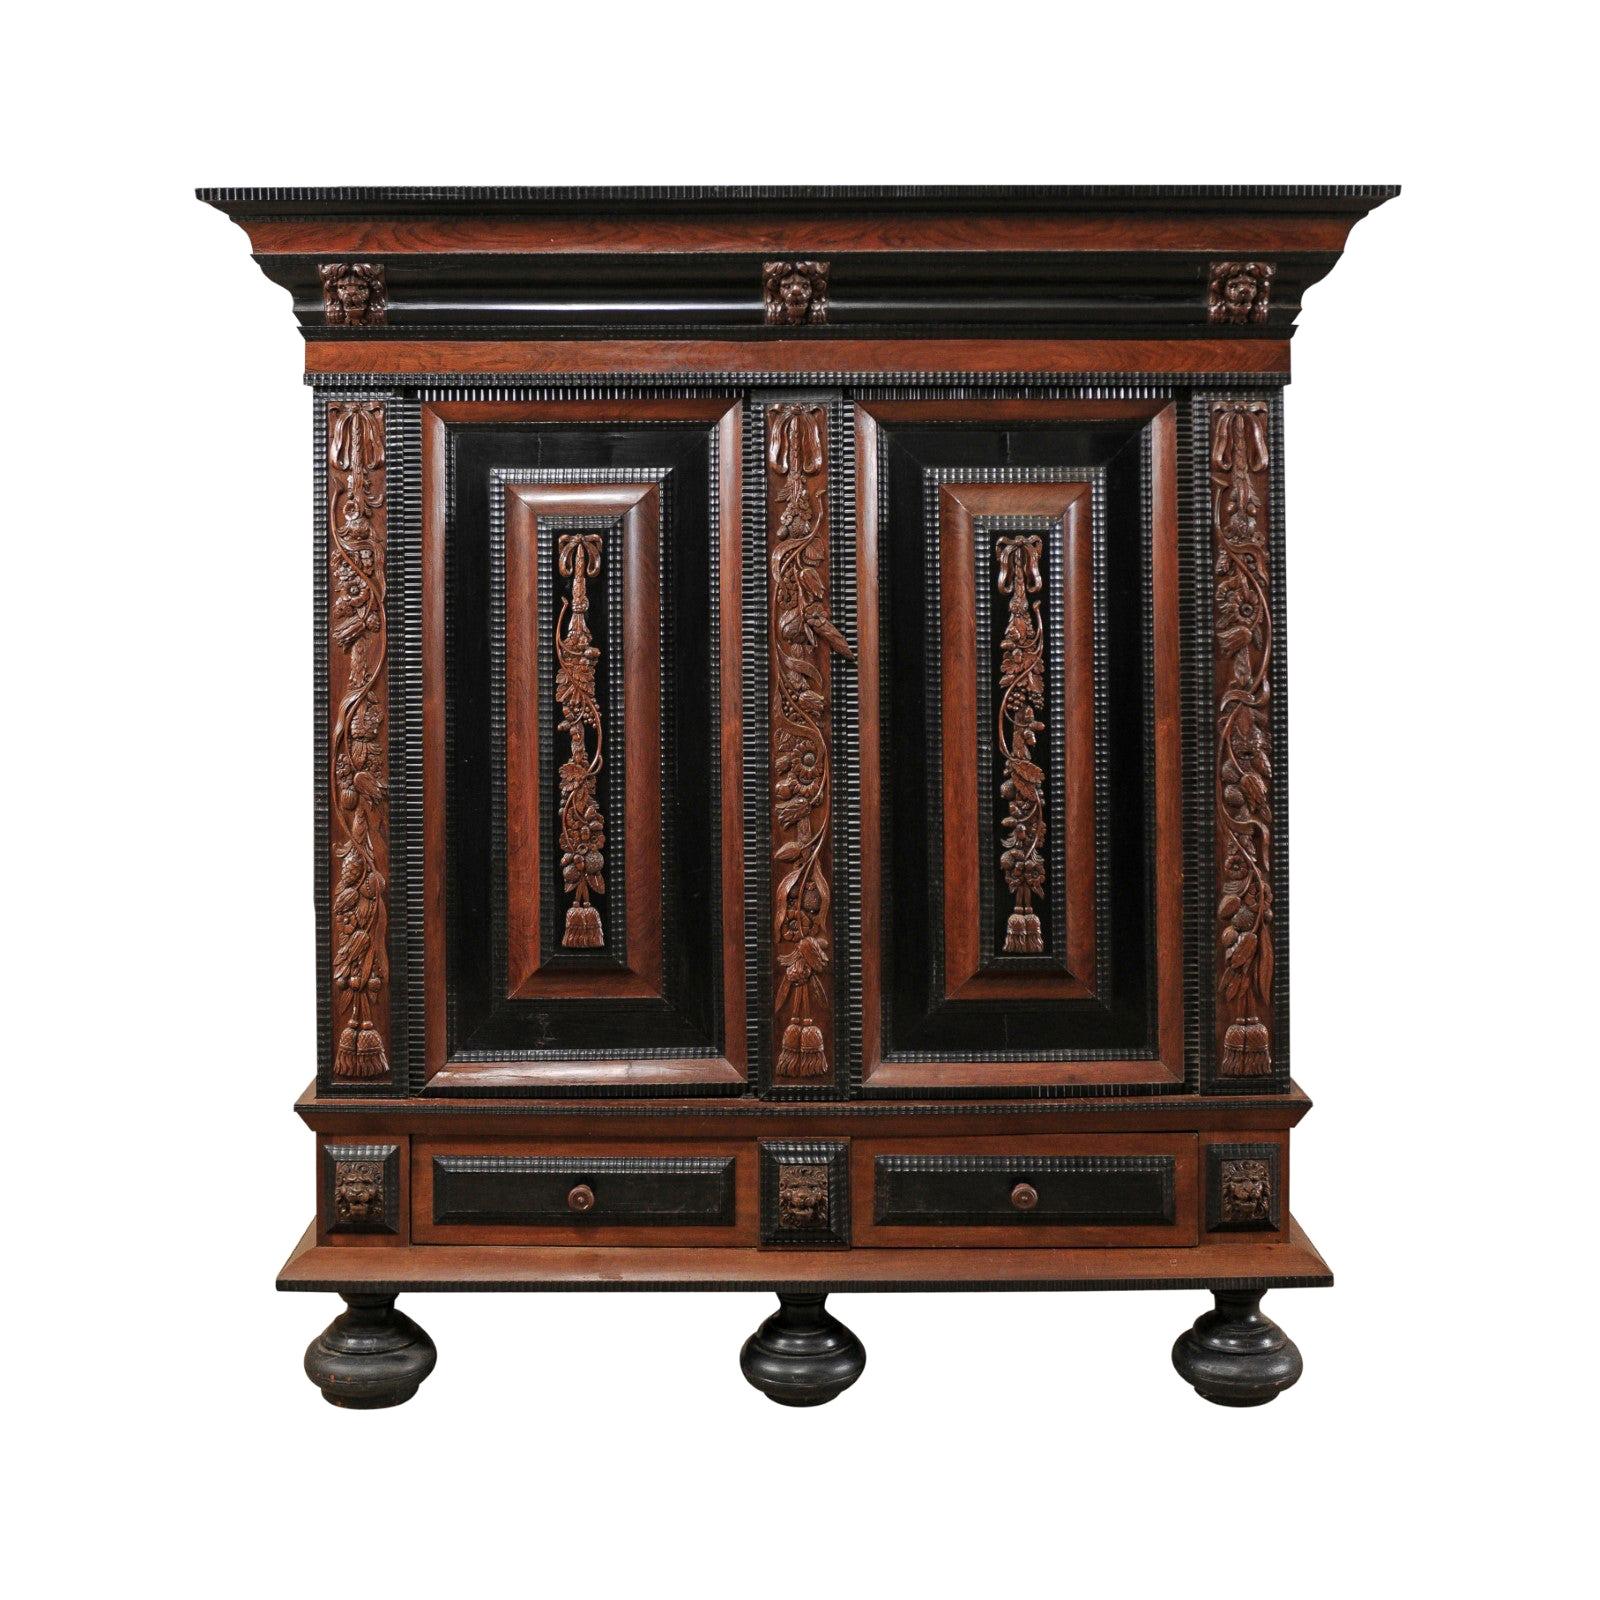 18th Century Period Baroque Kas Wardrobe Cabinet with Rich Carved Wood Details